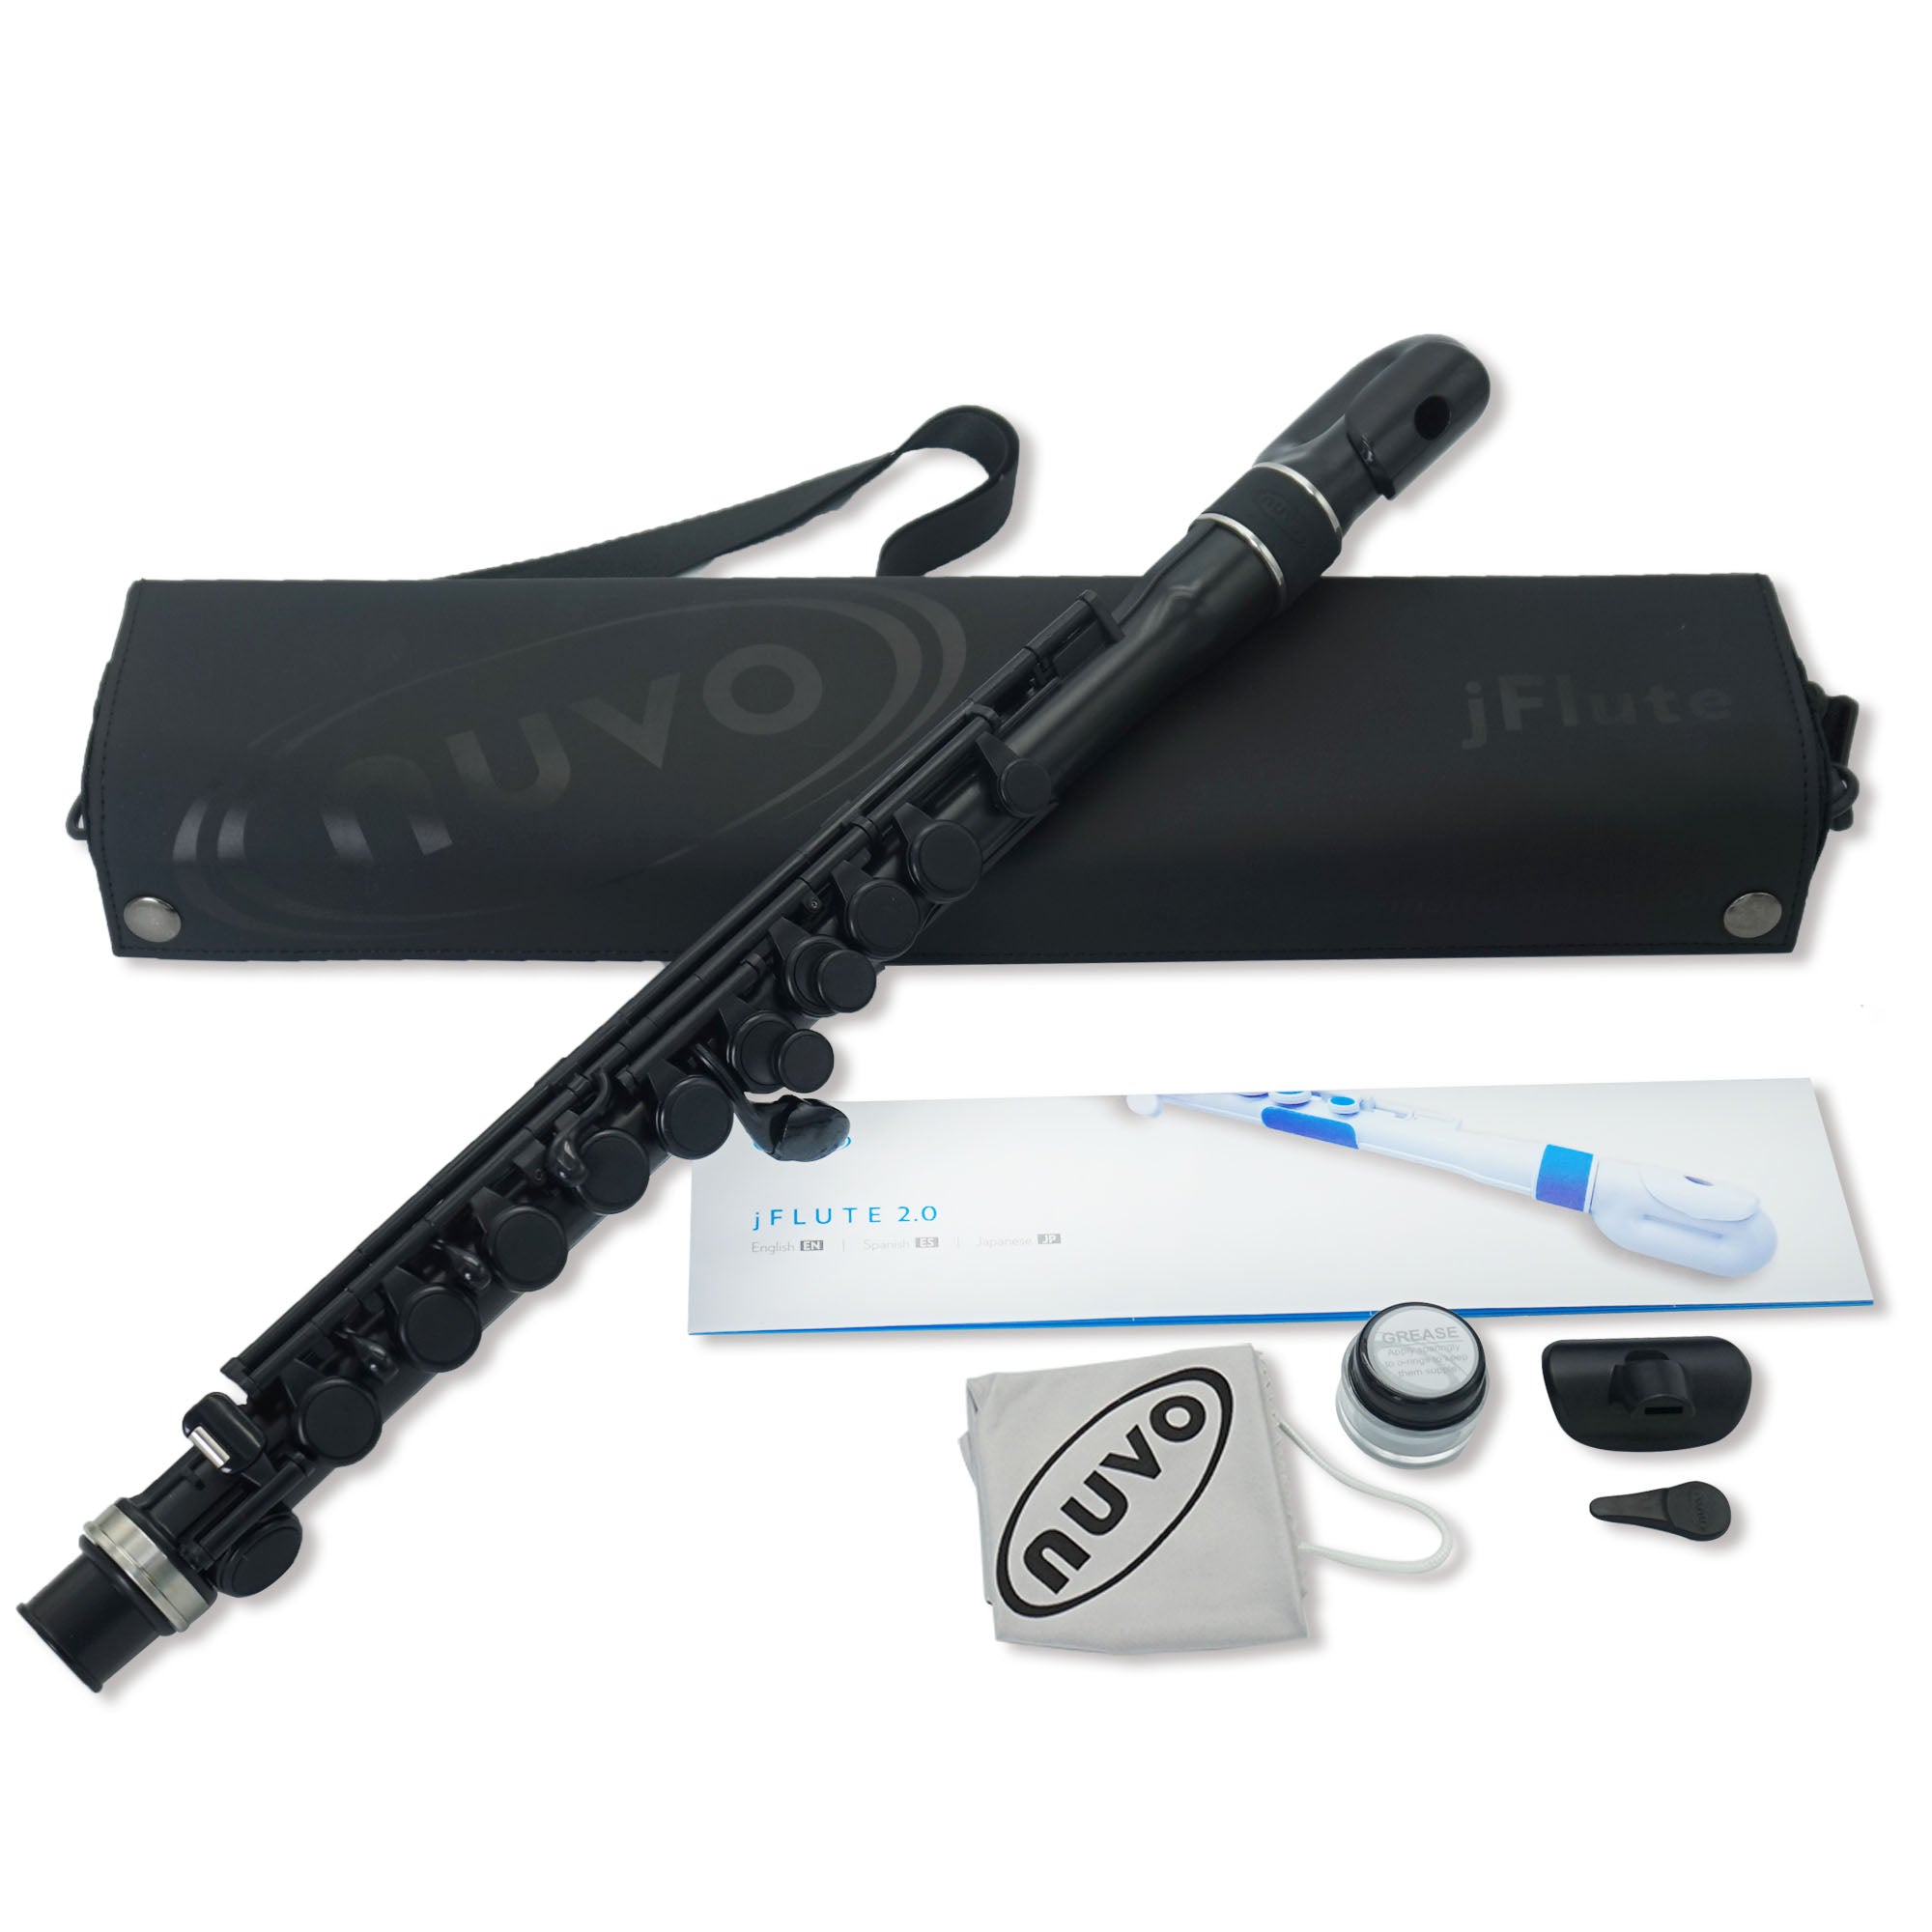 Nuvo jFlute 2.0 with Donut Headjoint (assorted colors)